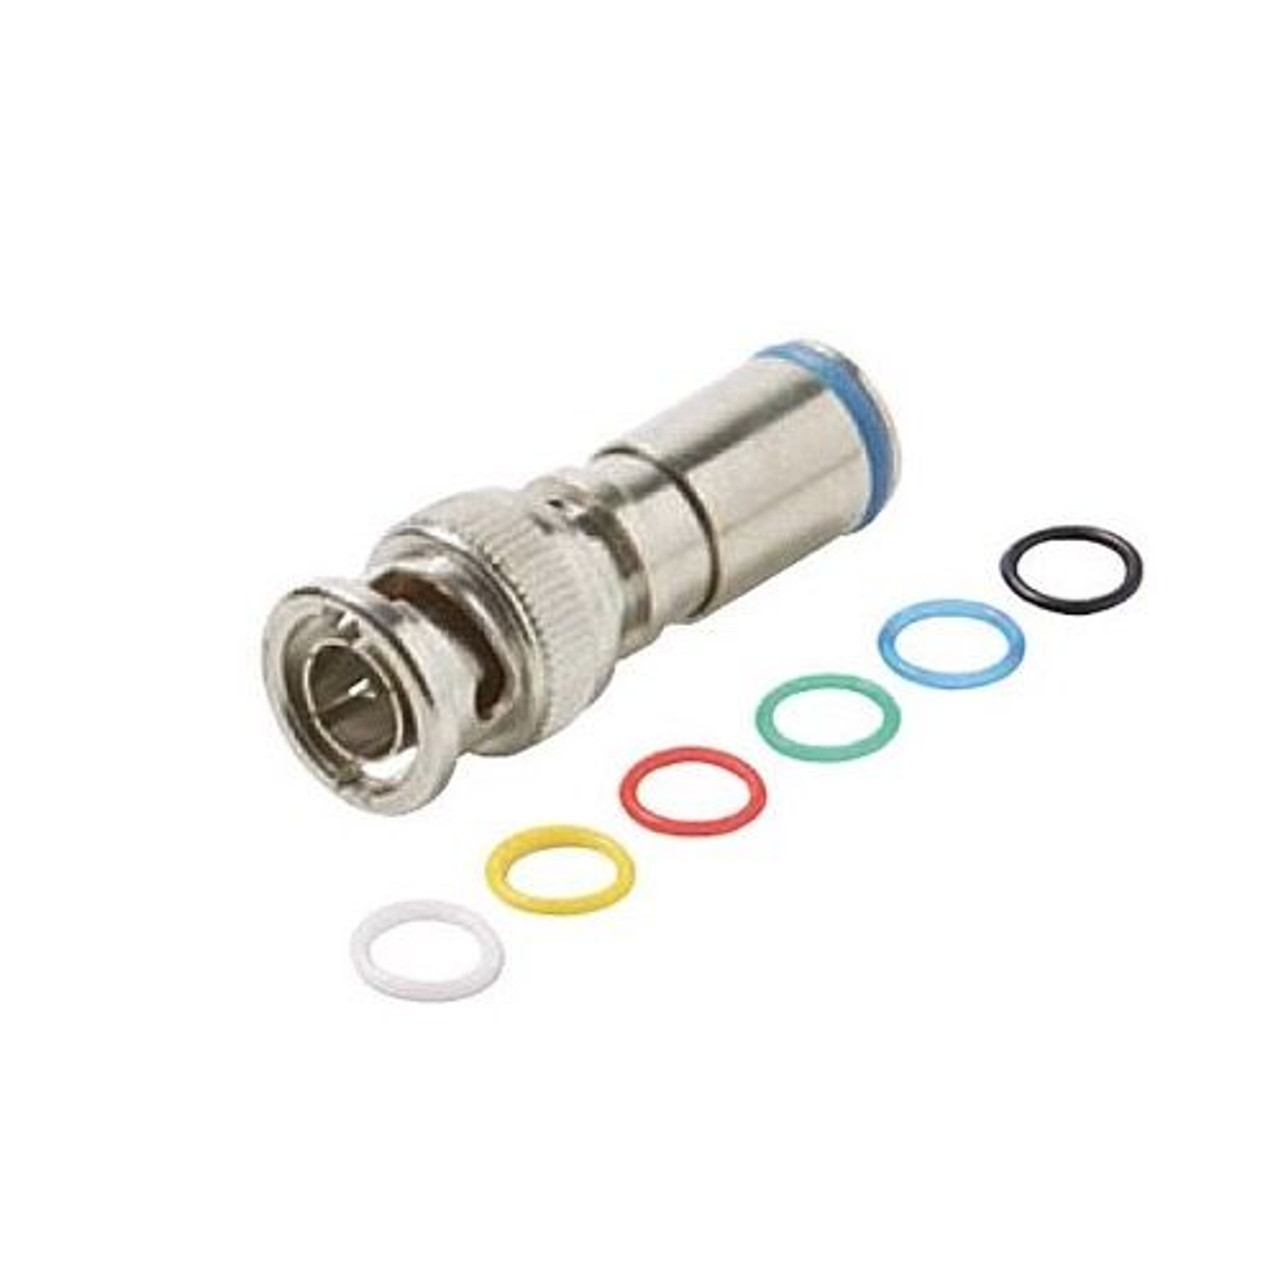 Steren 200-162 BNC Male Compression Connector RG59 Coaxial Cable Permaseal II Audio Video Six Color Bands Nickel Plate High Performance 1 Pack Lot Coaxial Cable RG-59 Line Plug BNC Adapter